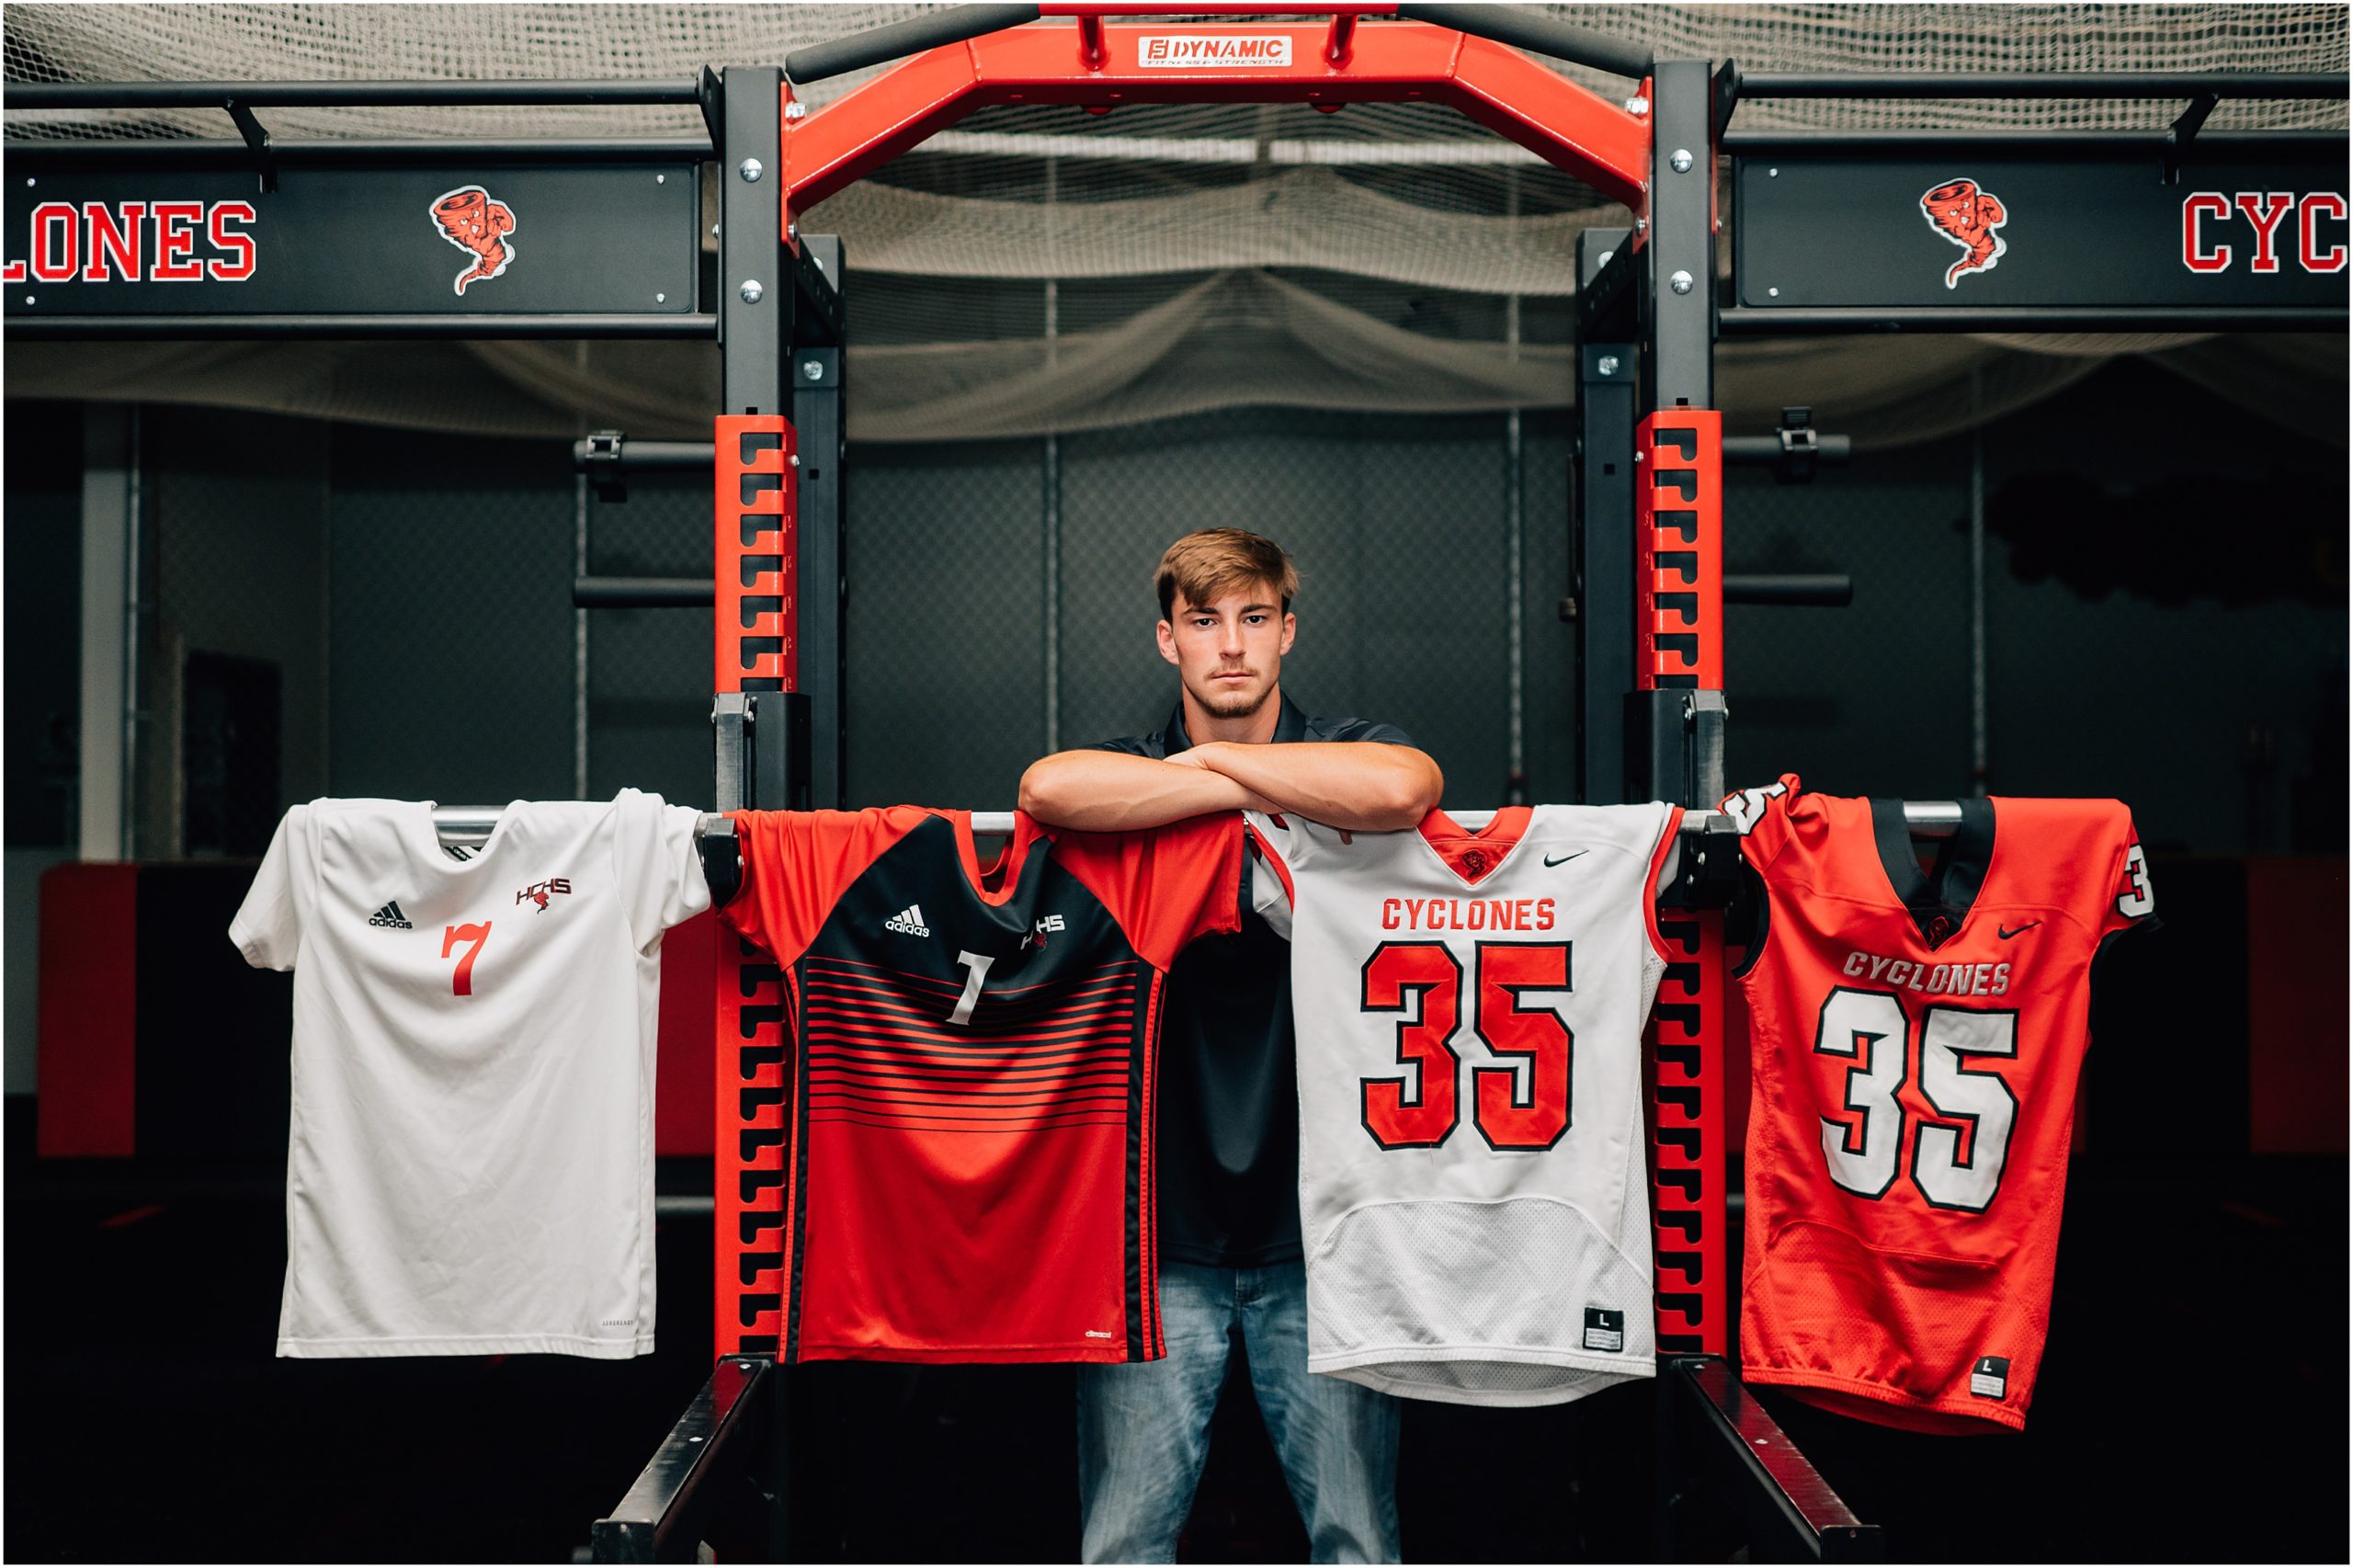 Weight Room senior picture ideas - photograph by Anna Brace, a Harlan Iowa Portrait Photographer of a boy standing underneath a weight lifting set with his jersey's strung along the weight bar.